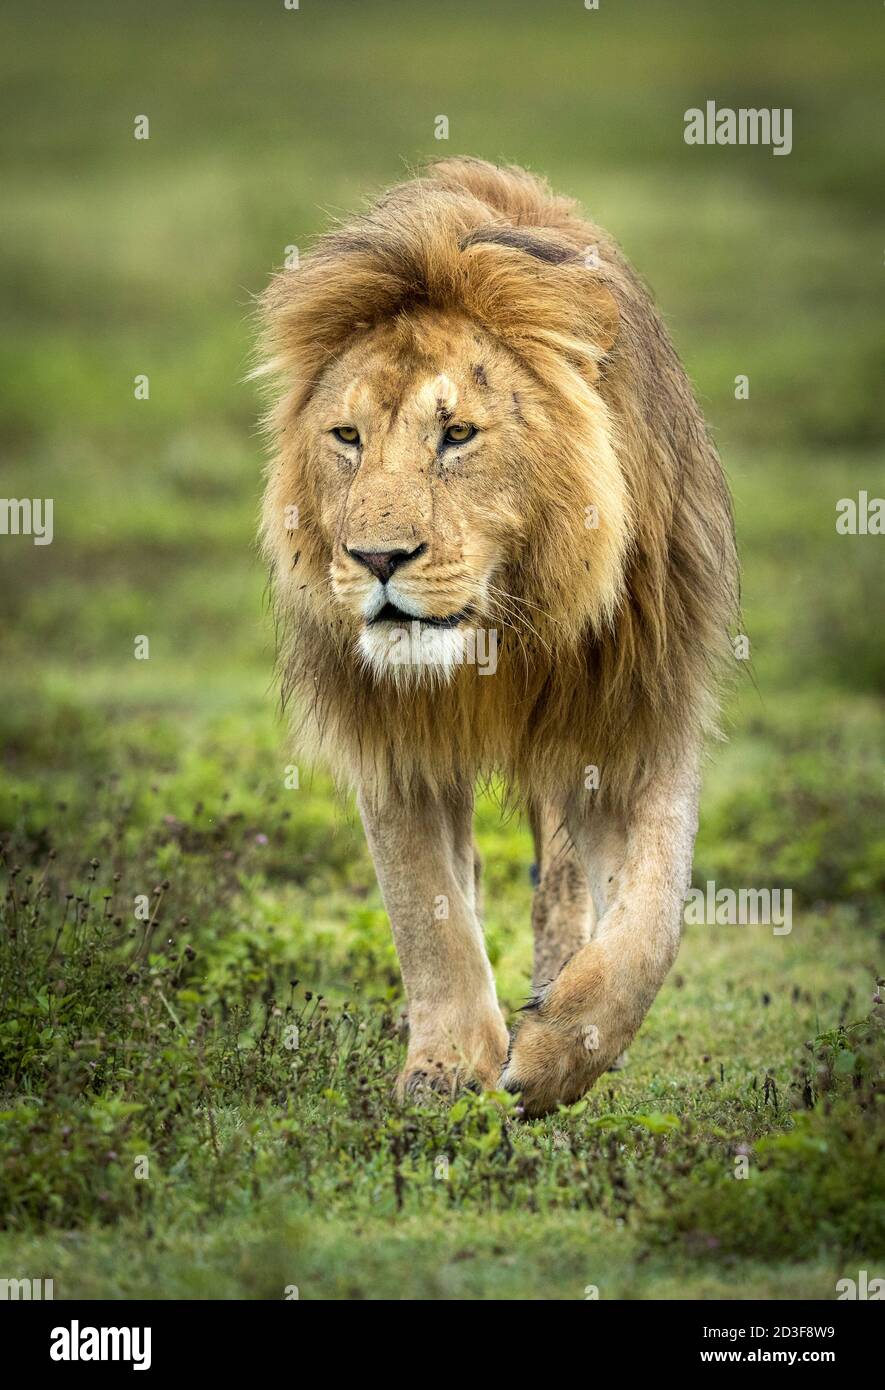 Vertical portrait of a male lion walking in green grass in Ngorongoro Crater in Tanzania Stock Photo